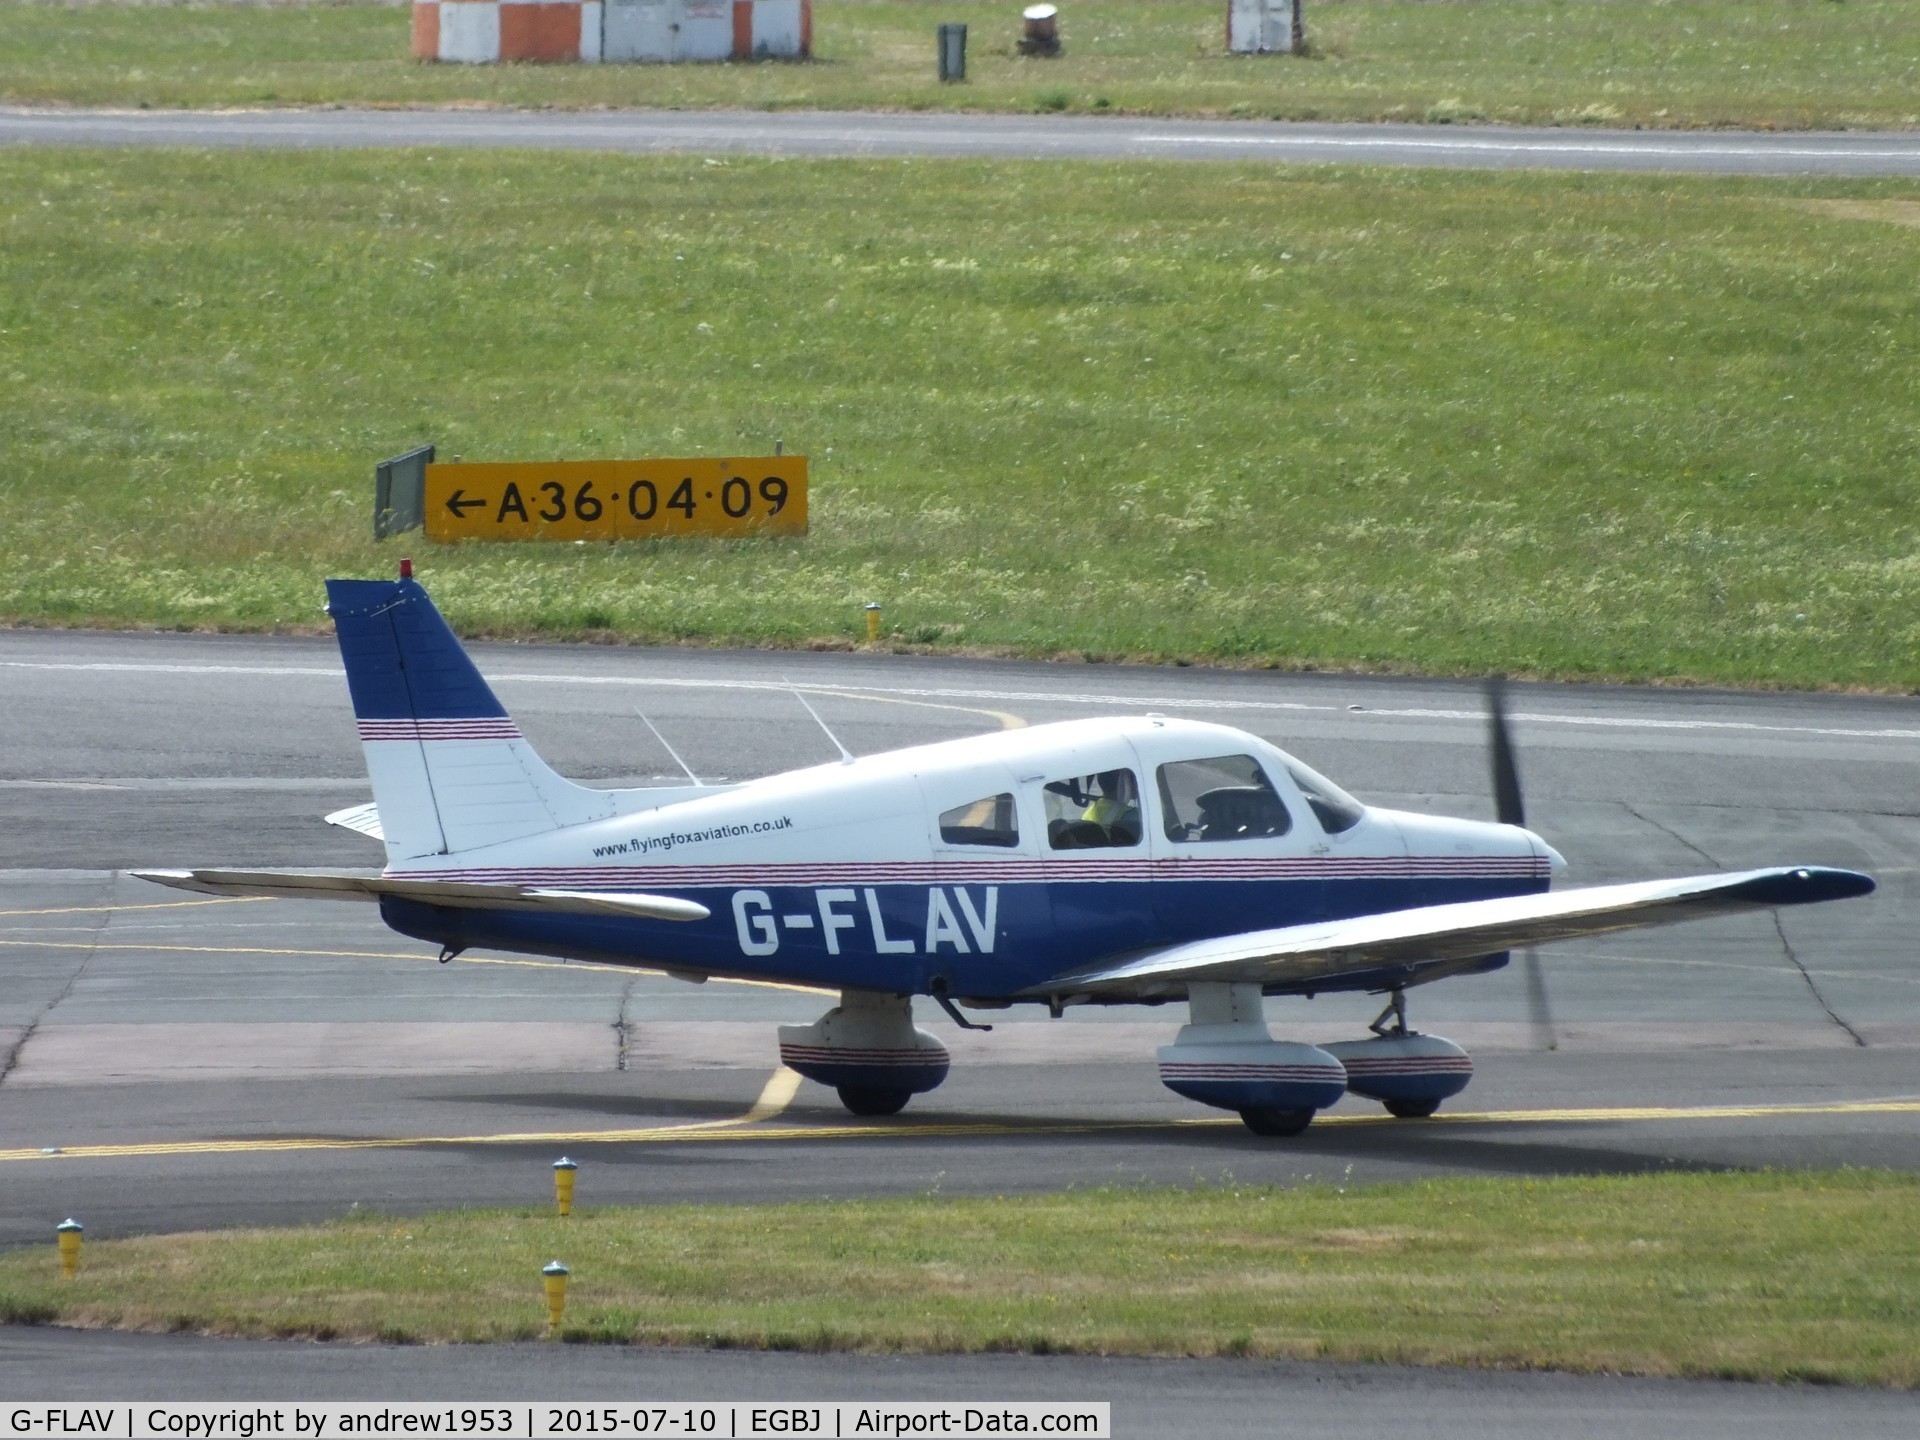 G-FLAV, 1980 Piper PA-28-161 Warrior ll C/N 28-8016283, G-FLAV at Gloucestershire Airport.